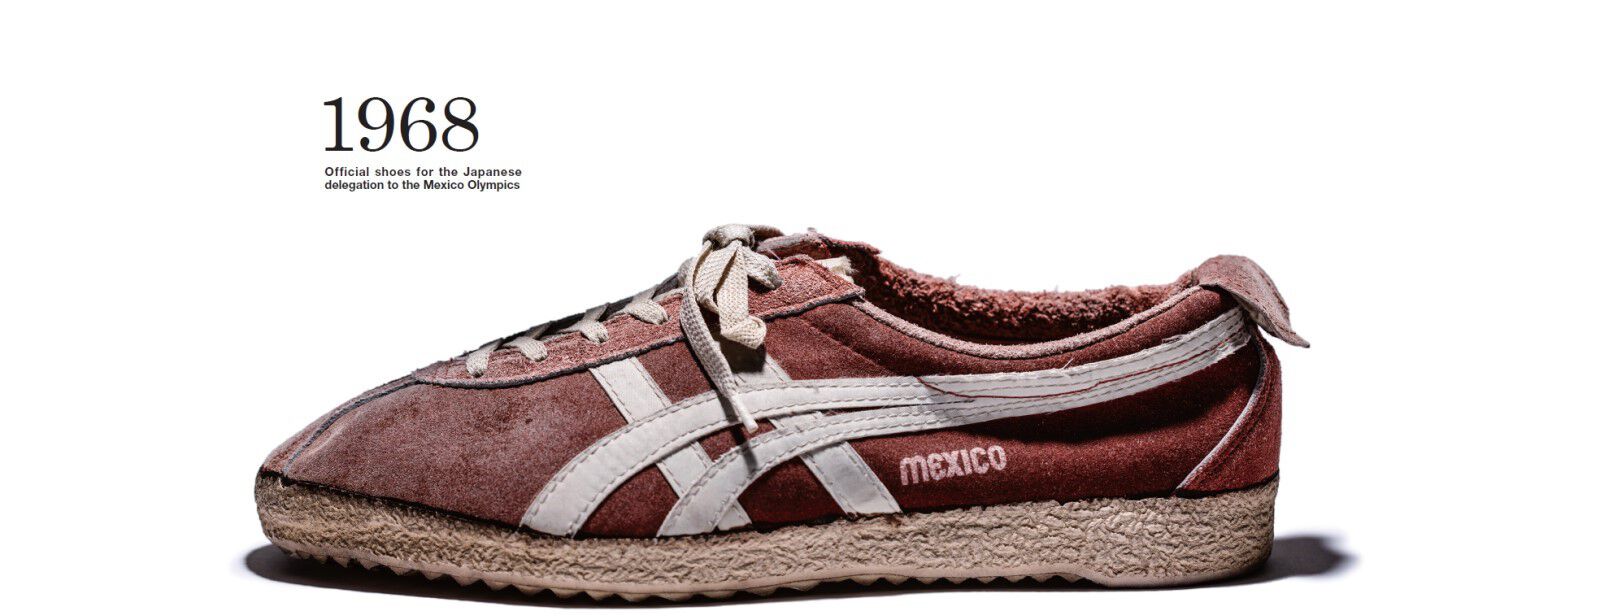 History of fashion and sport timeline | Onitsuka Tiger | ASICS